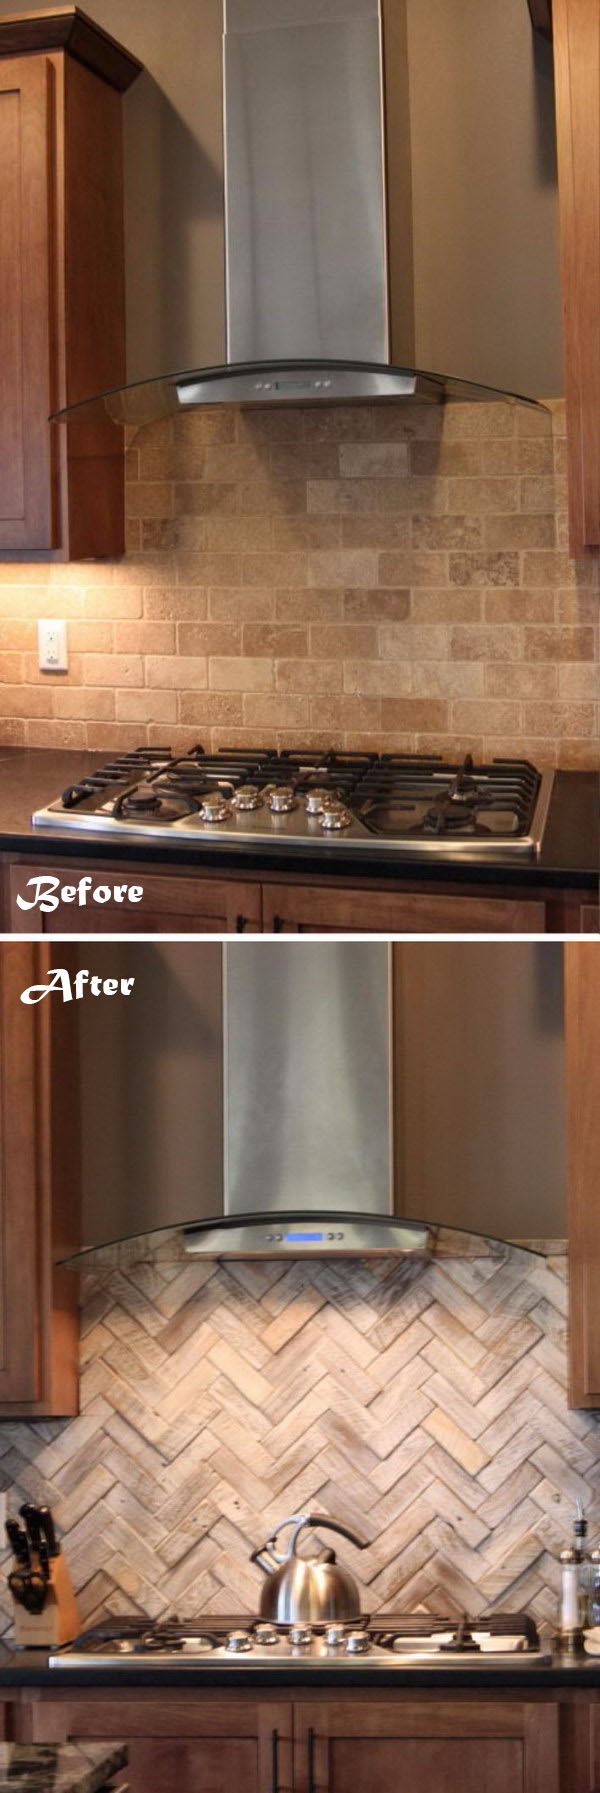 Change the Look and Feel of Your Kitchen by Changing the Backsplash. 